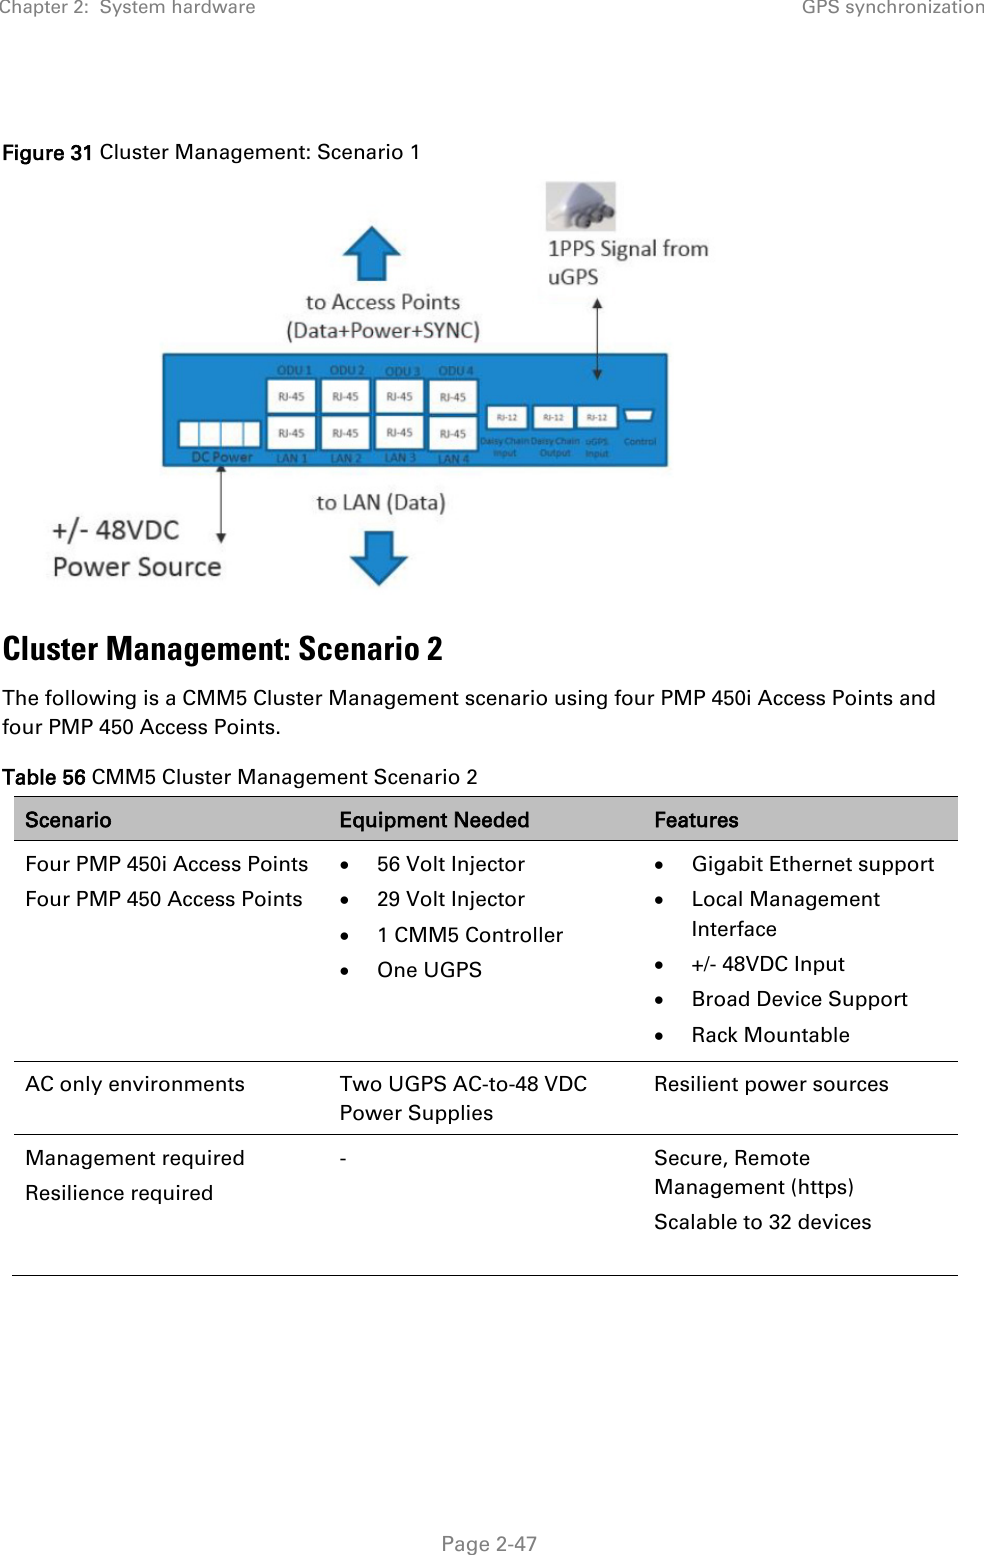 Chapter 2:  System hardware GPS synchronization   Page 2-47  Figure 31 Cluster Management: Scenario 1  Cluster Management: Scenario 2 The following is a CMM5 Cluster Management scenario using four PMP 450i Access Points and four PMP 450 Access Points. Table 56 CMM5 Cluster Management Scenario 2 Scenario Equipment Needed Features Four PMP 450i Access Points Four PMP 450 Access Points • 56 Volt Injector • 29 Volt Injector • 1 CMM5 Controller • One UGPS • Gigabit Ethernet support • Local Management Interface • +/- 48VDC Input • Broad Device Support • Rack Mountable AC only environments Two UGPS AC-to-48 VDC Power Supplies Resilient power sources Management required Resilience required -  Secure, Remote Management (https) Scalable to 32 devices    